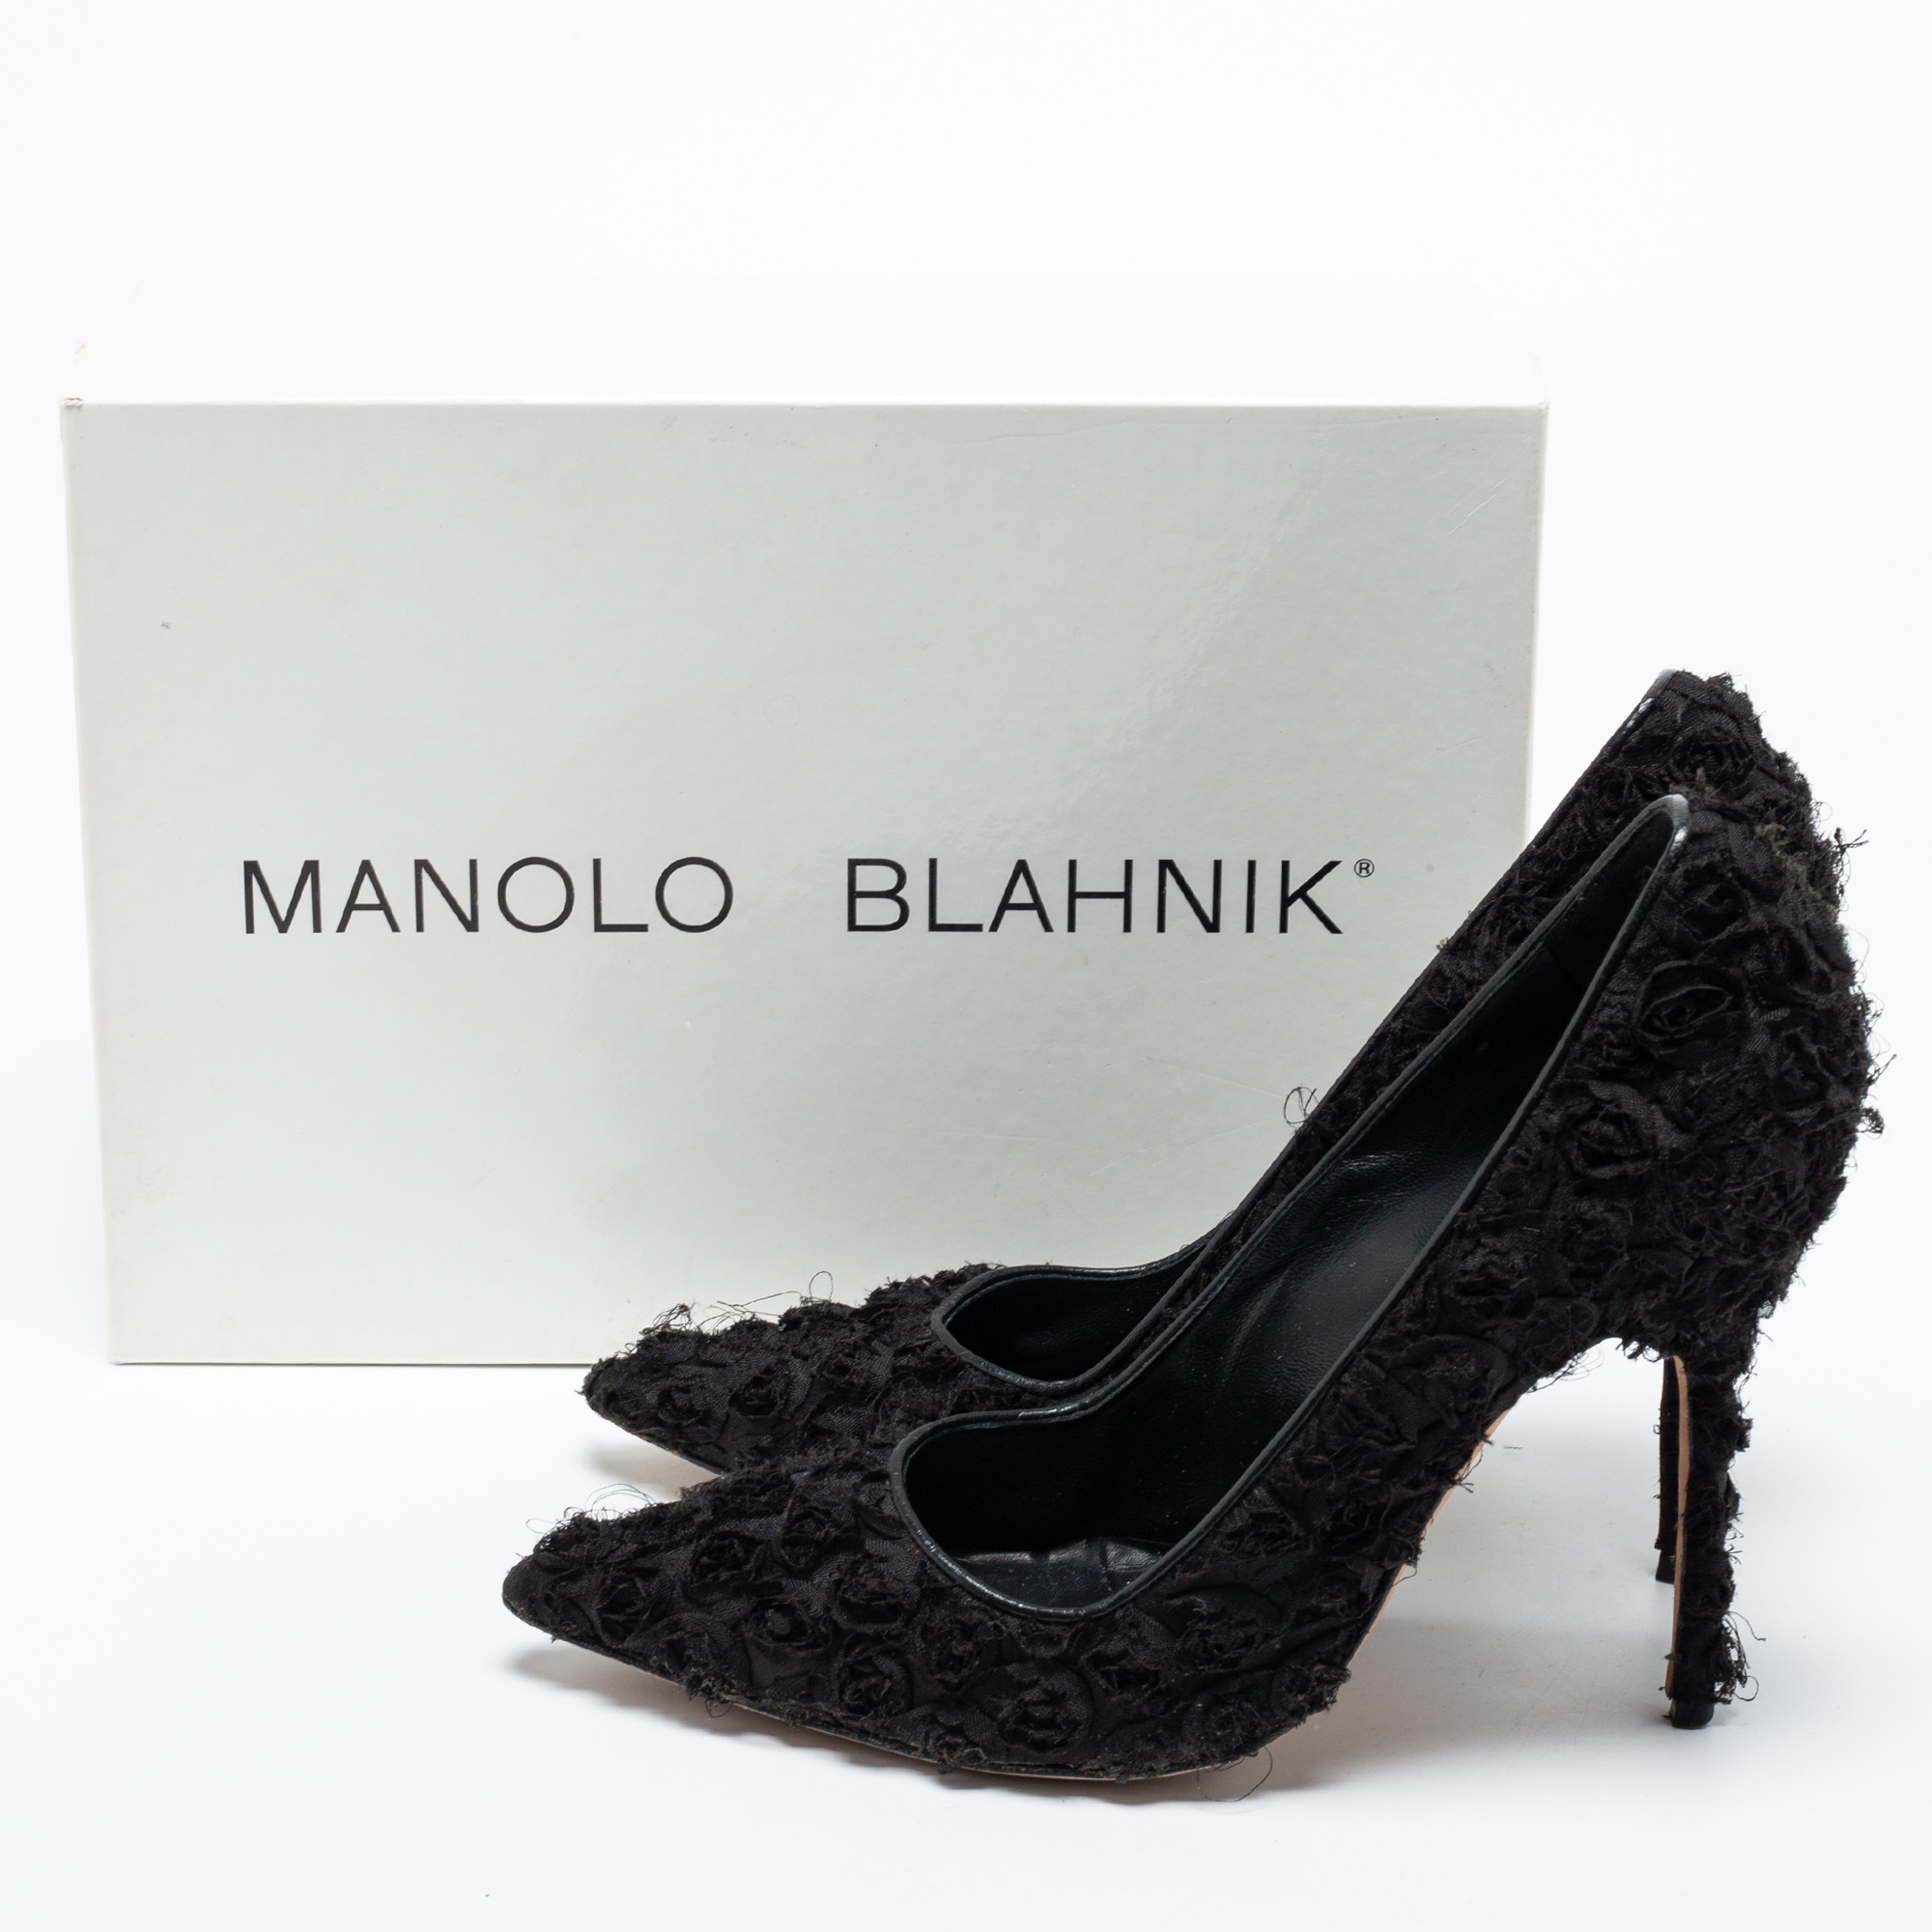 Manolo Blahnik Black Floral Fabric Pointed Toe Pumps Size 39